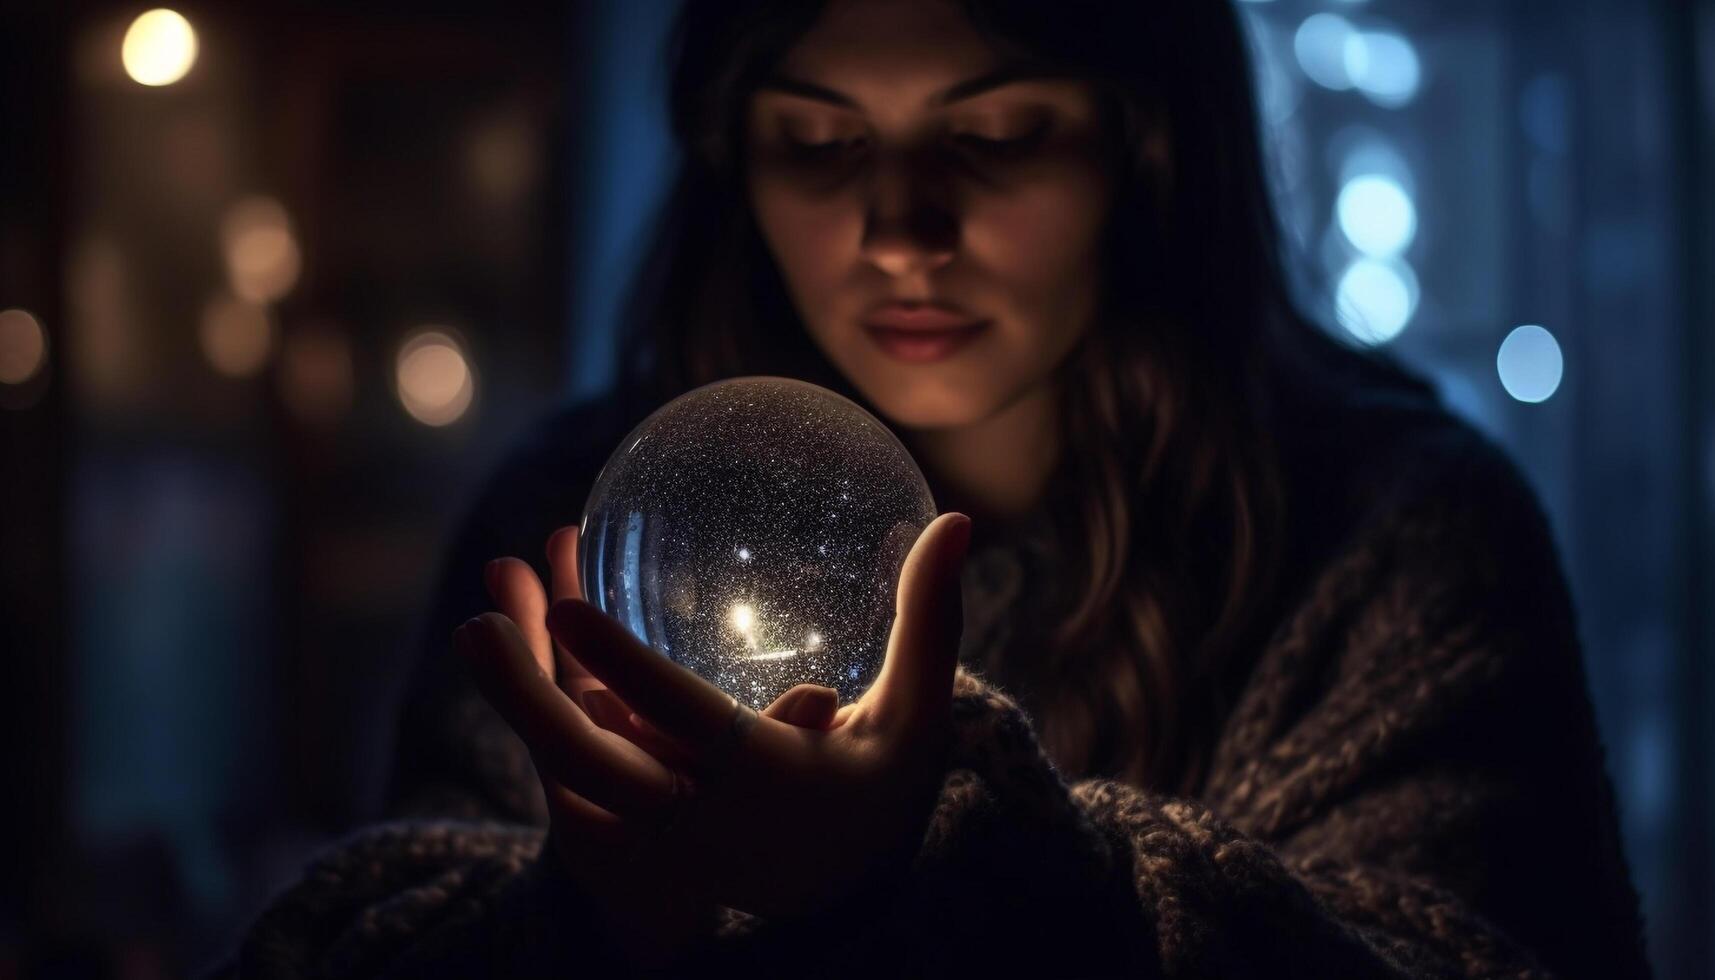 The young adult woman holds a glowing sphere, looking cheerful generated by AI photo